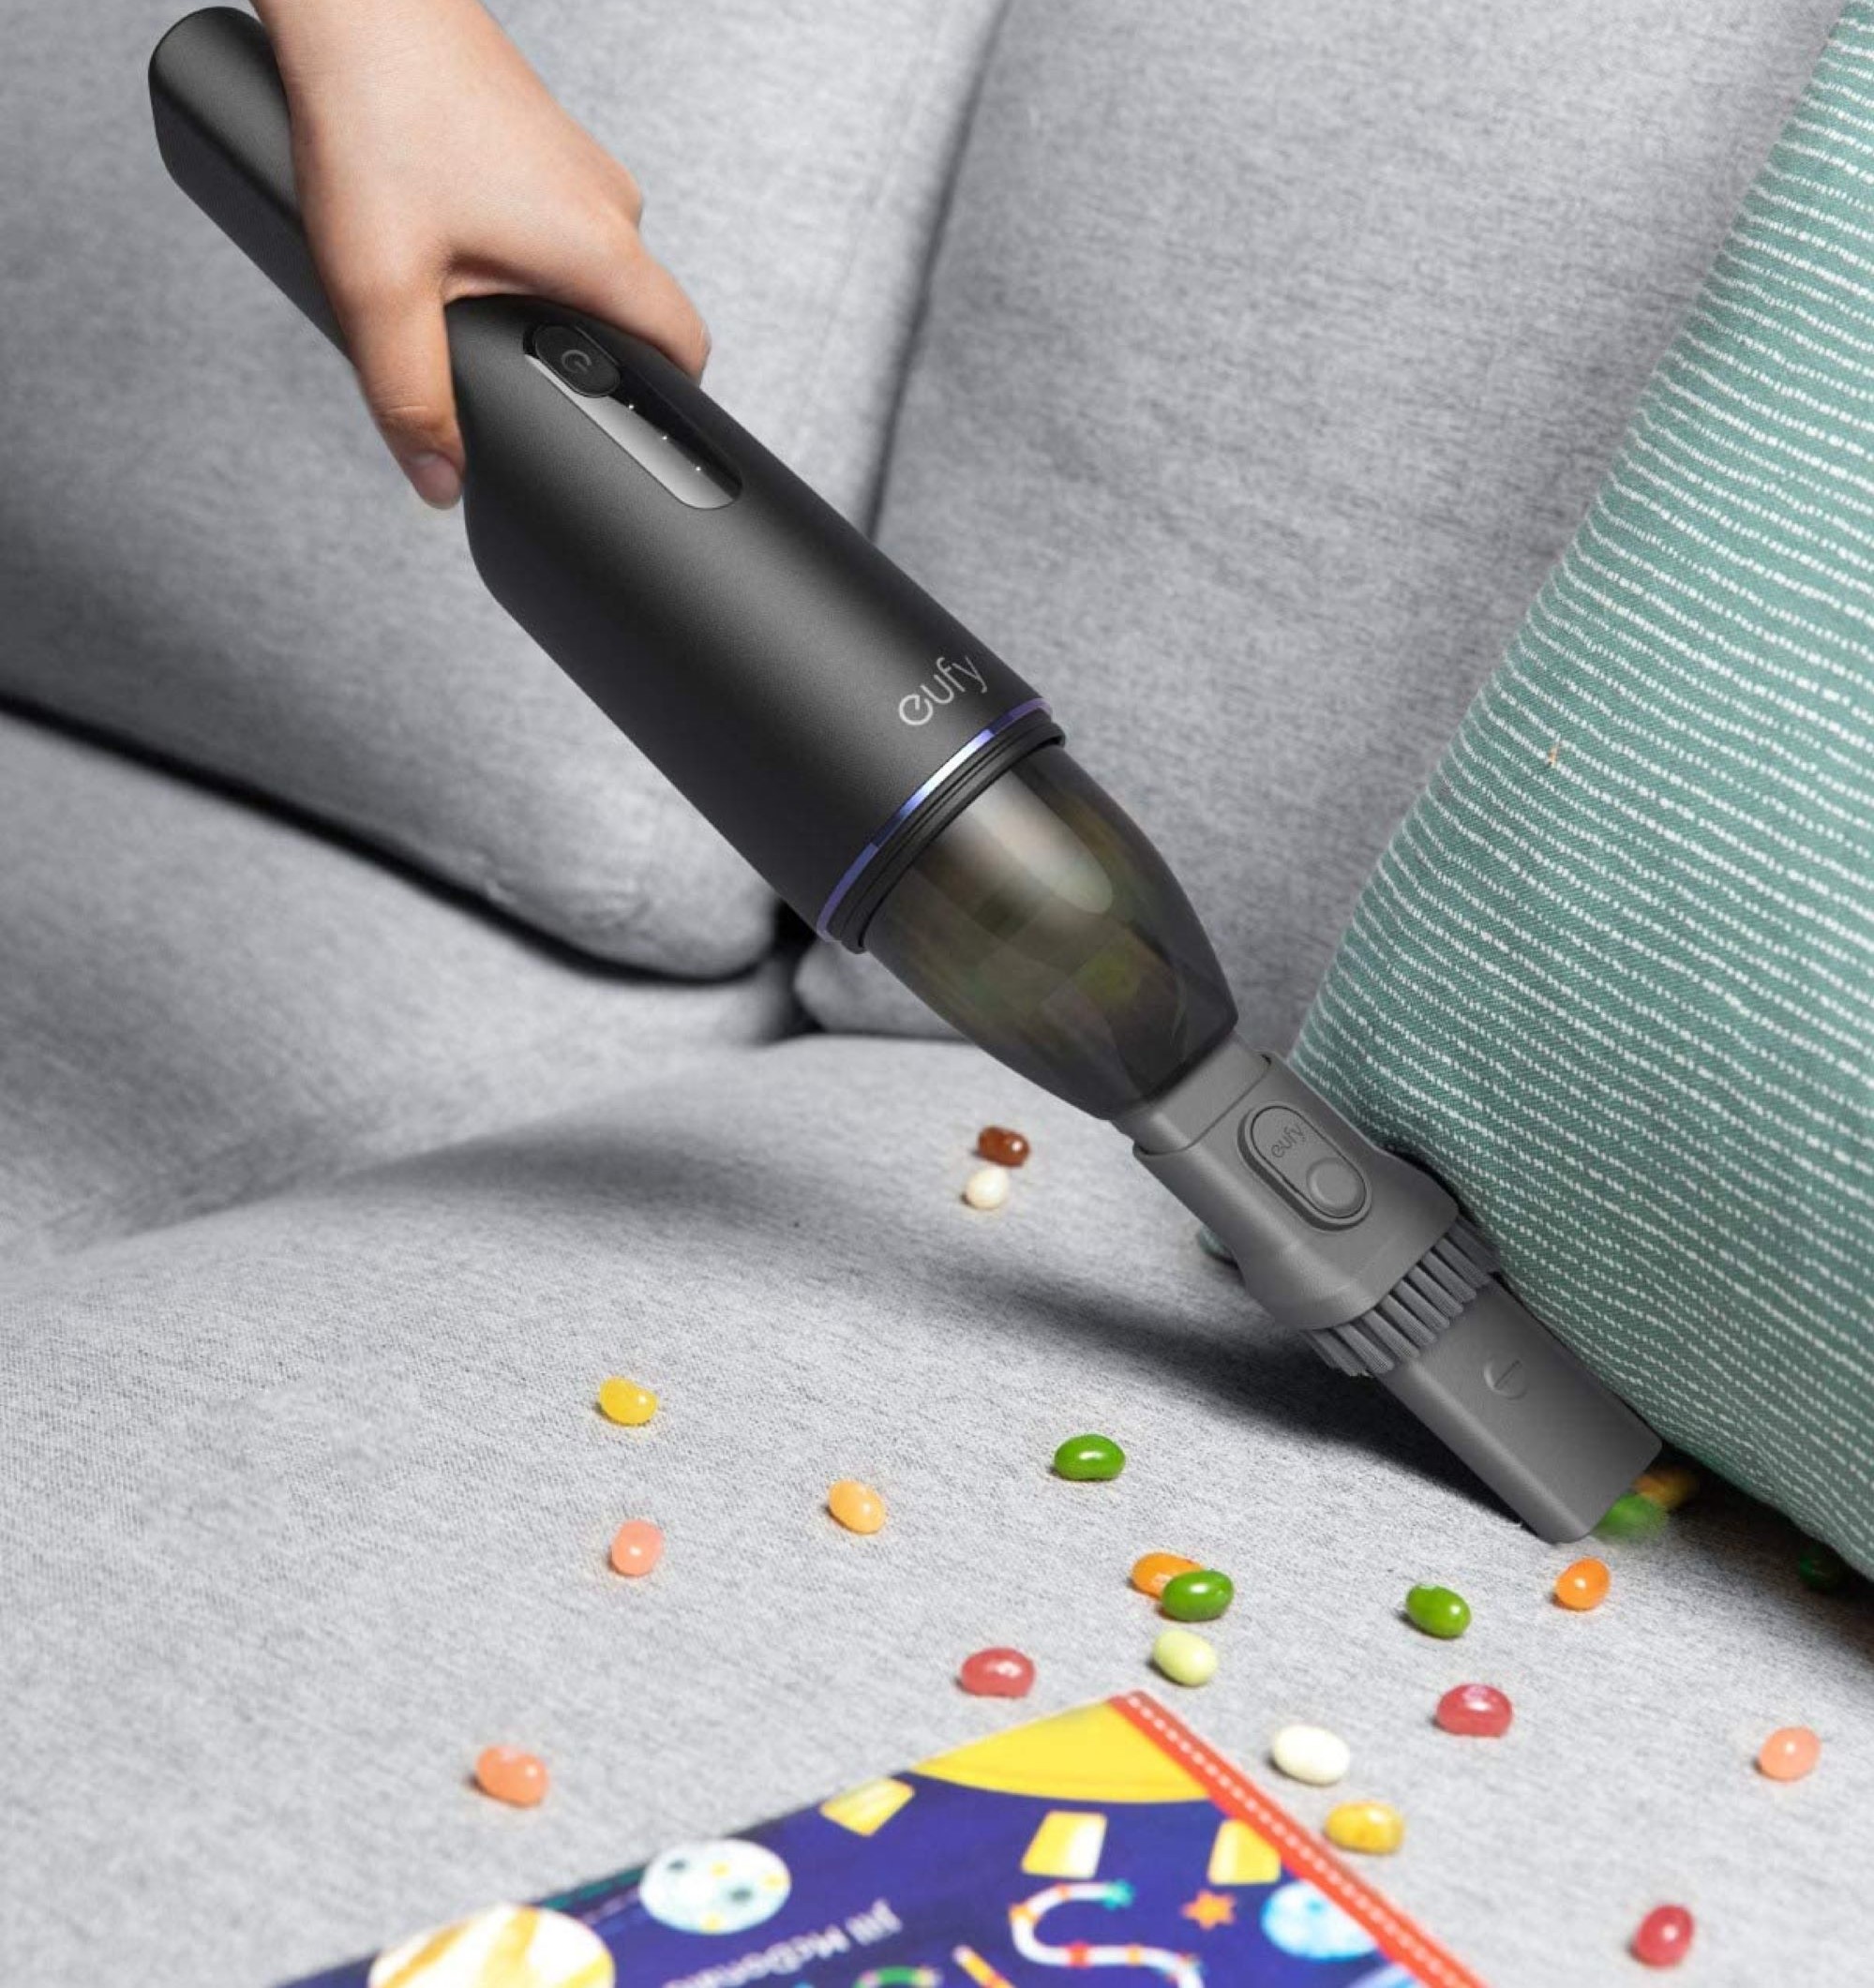 Eufy by Anker vacuum cleaning a couch